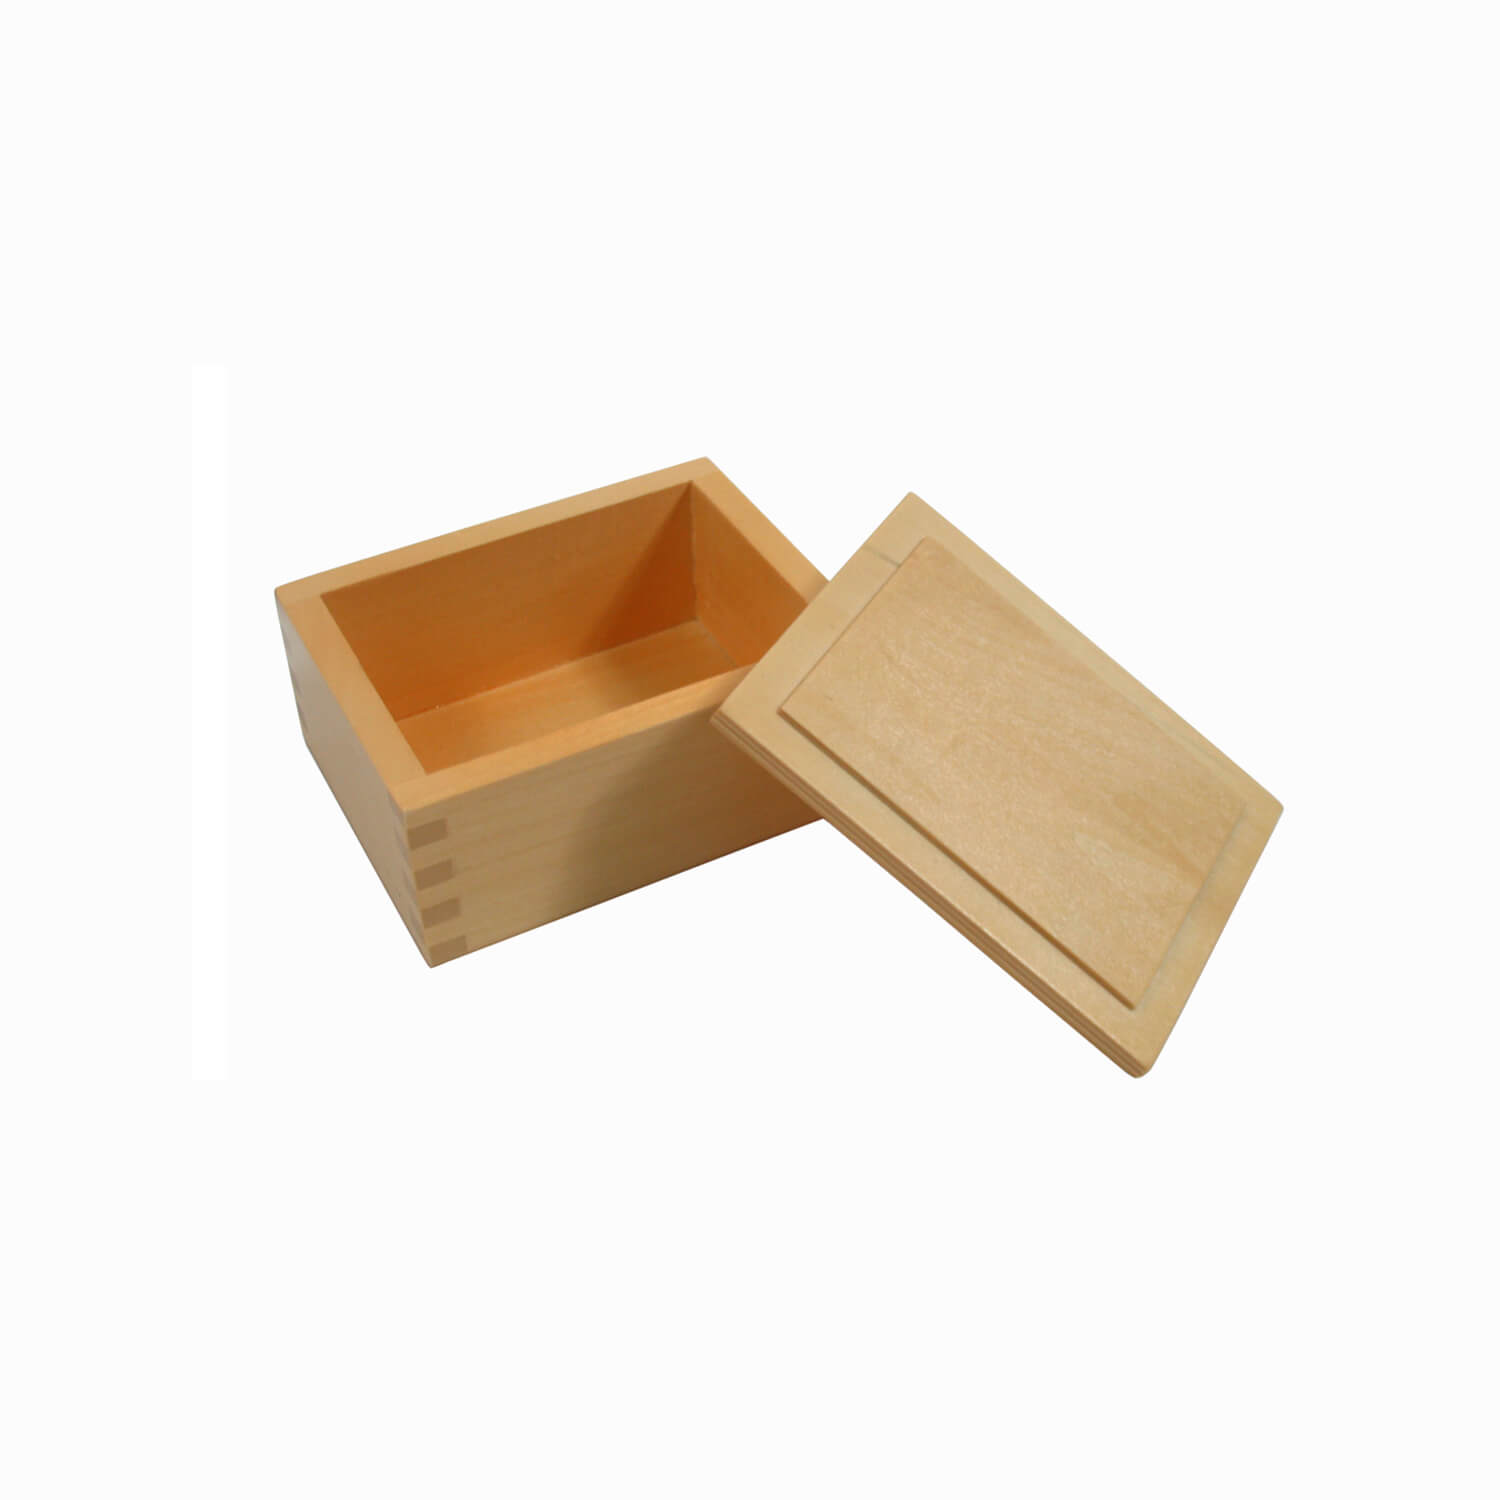 Wooden Box For Beads: 12x9.5x5.5cm